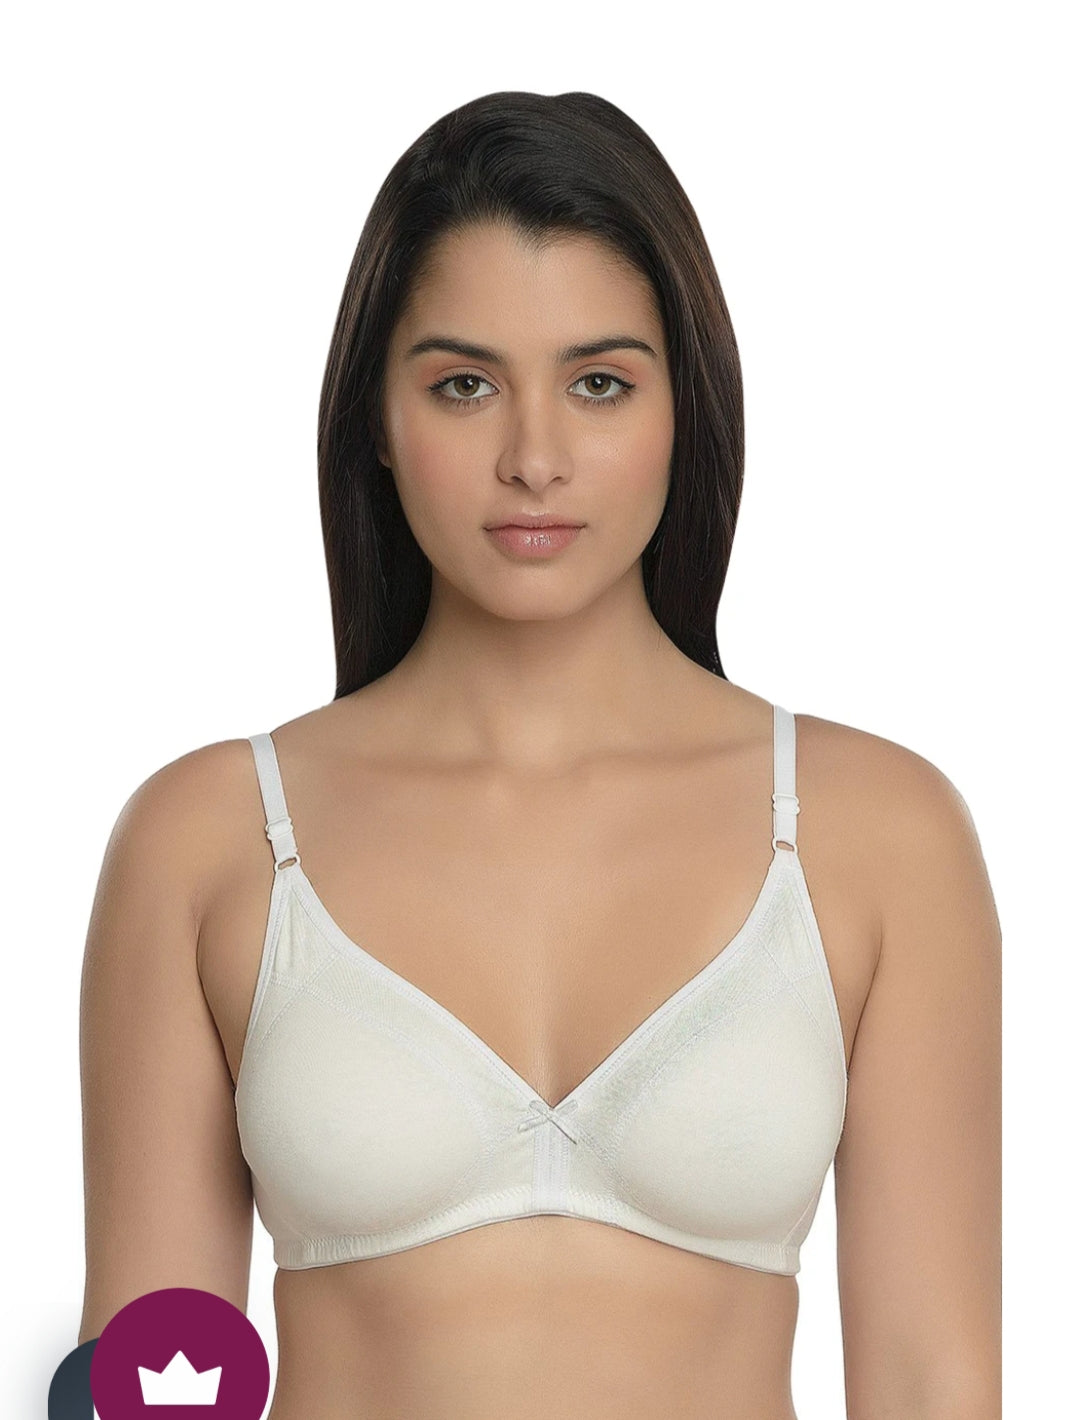 Premium Quality Cotton Skin Bra With Imported Material Non Padded